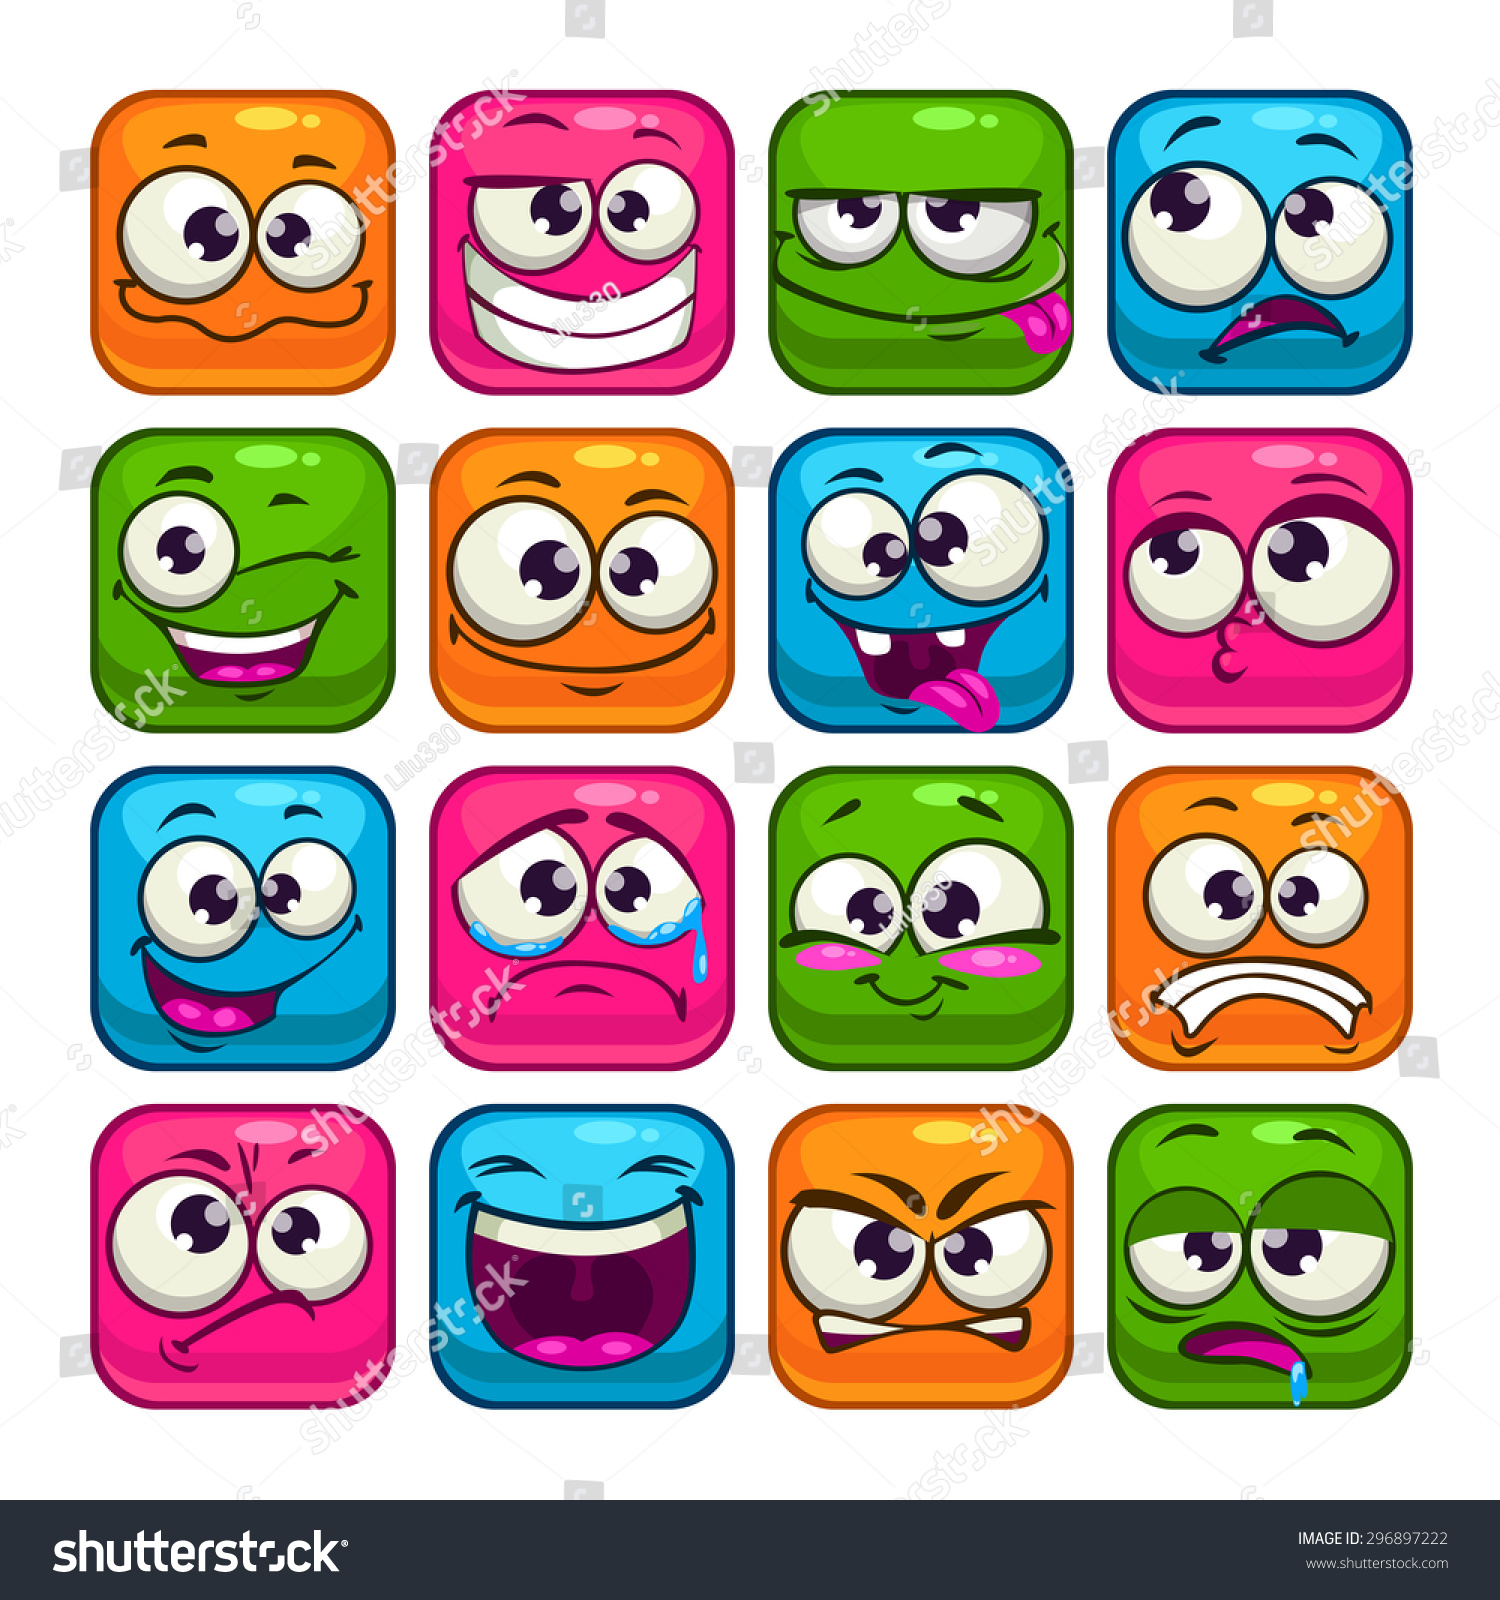 Funny Colorful Square Faces Set Cartoon Stock Vector (Royalty Free ...